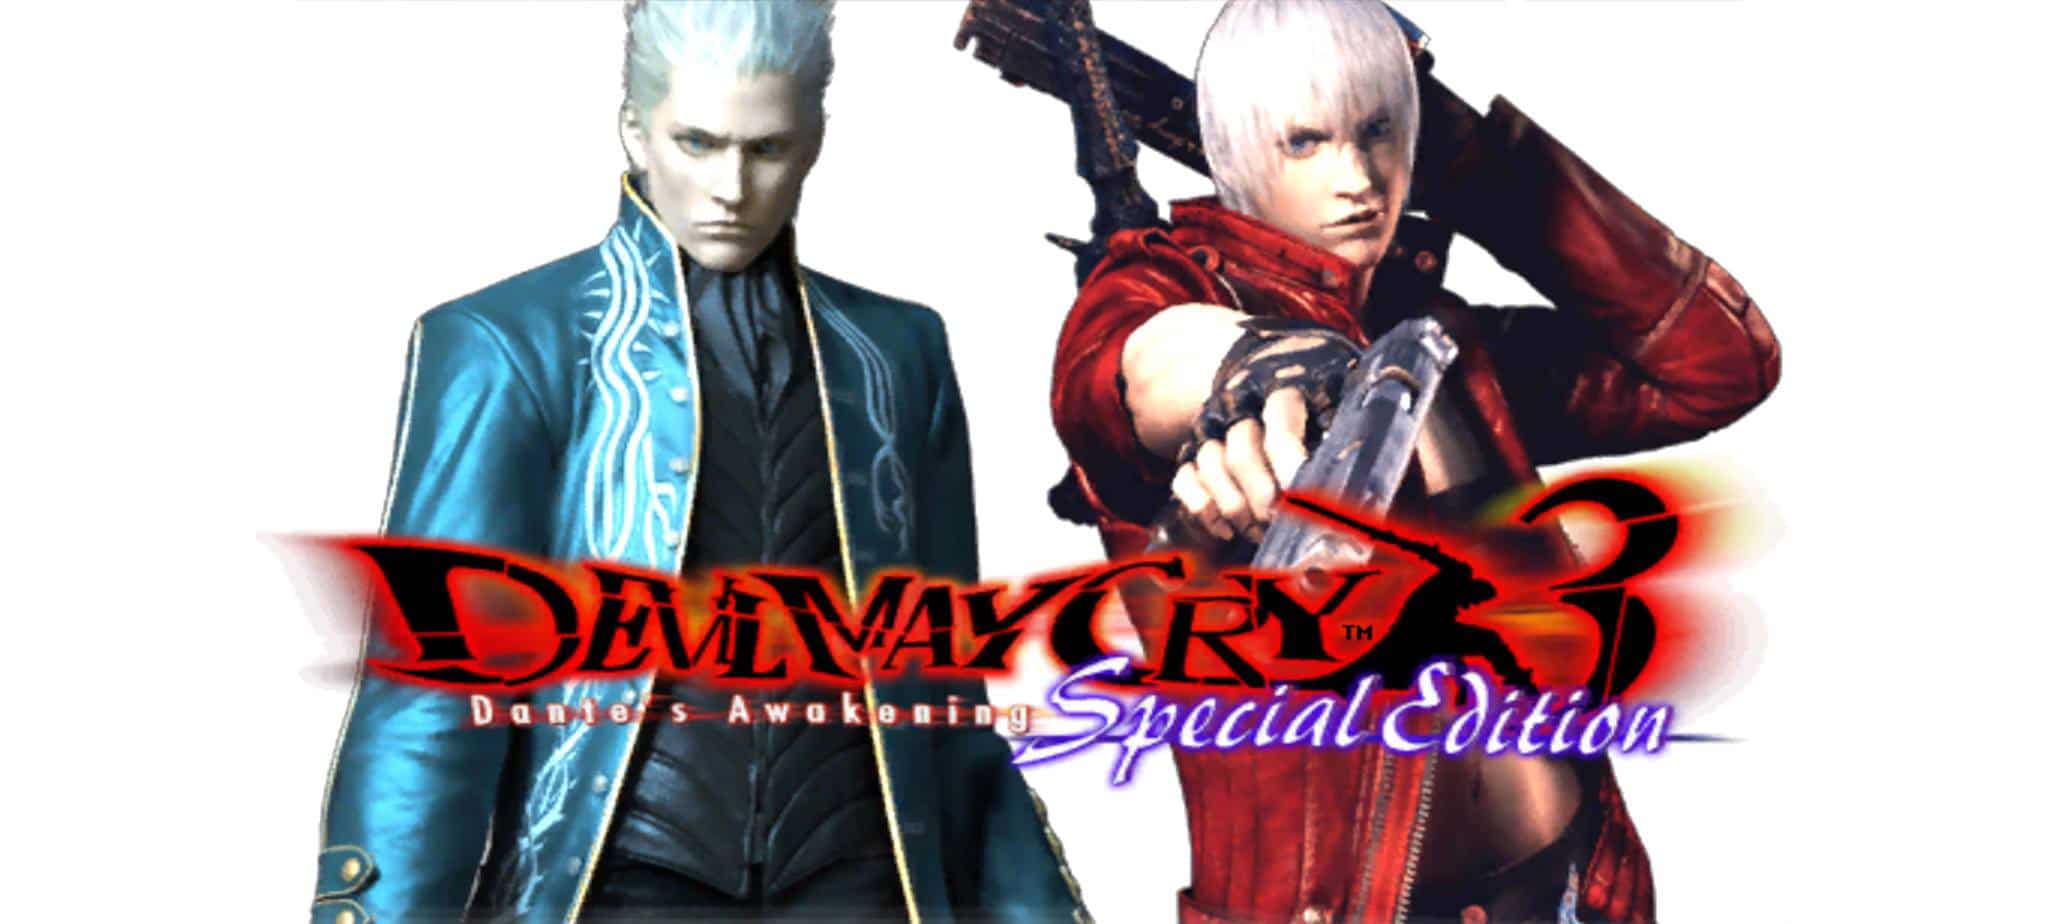 Devil may cry 3 can find steam фото 73